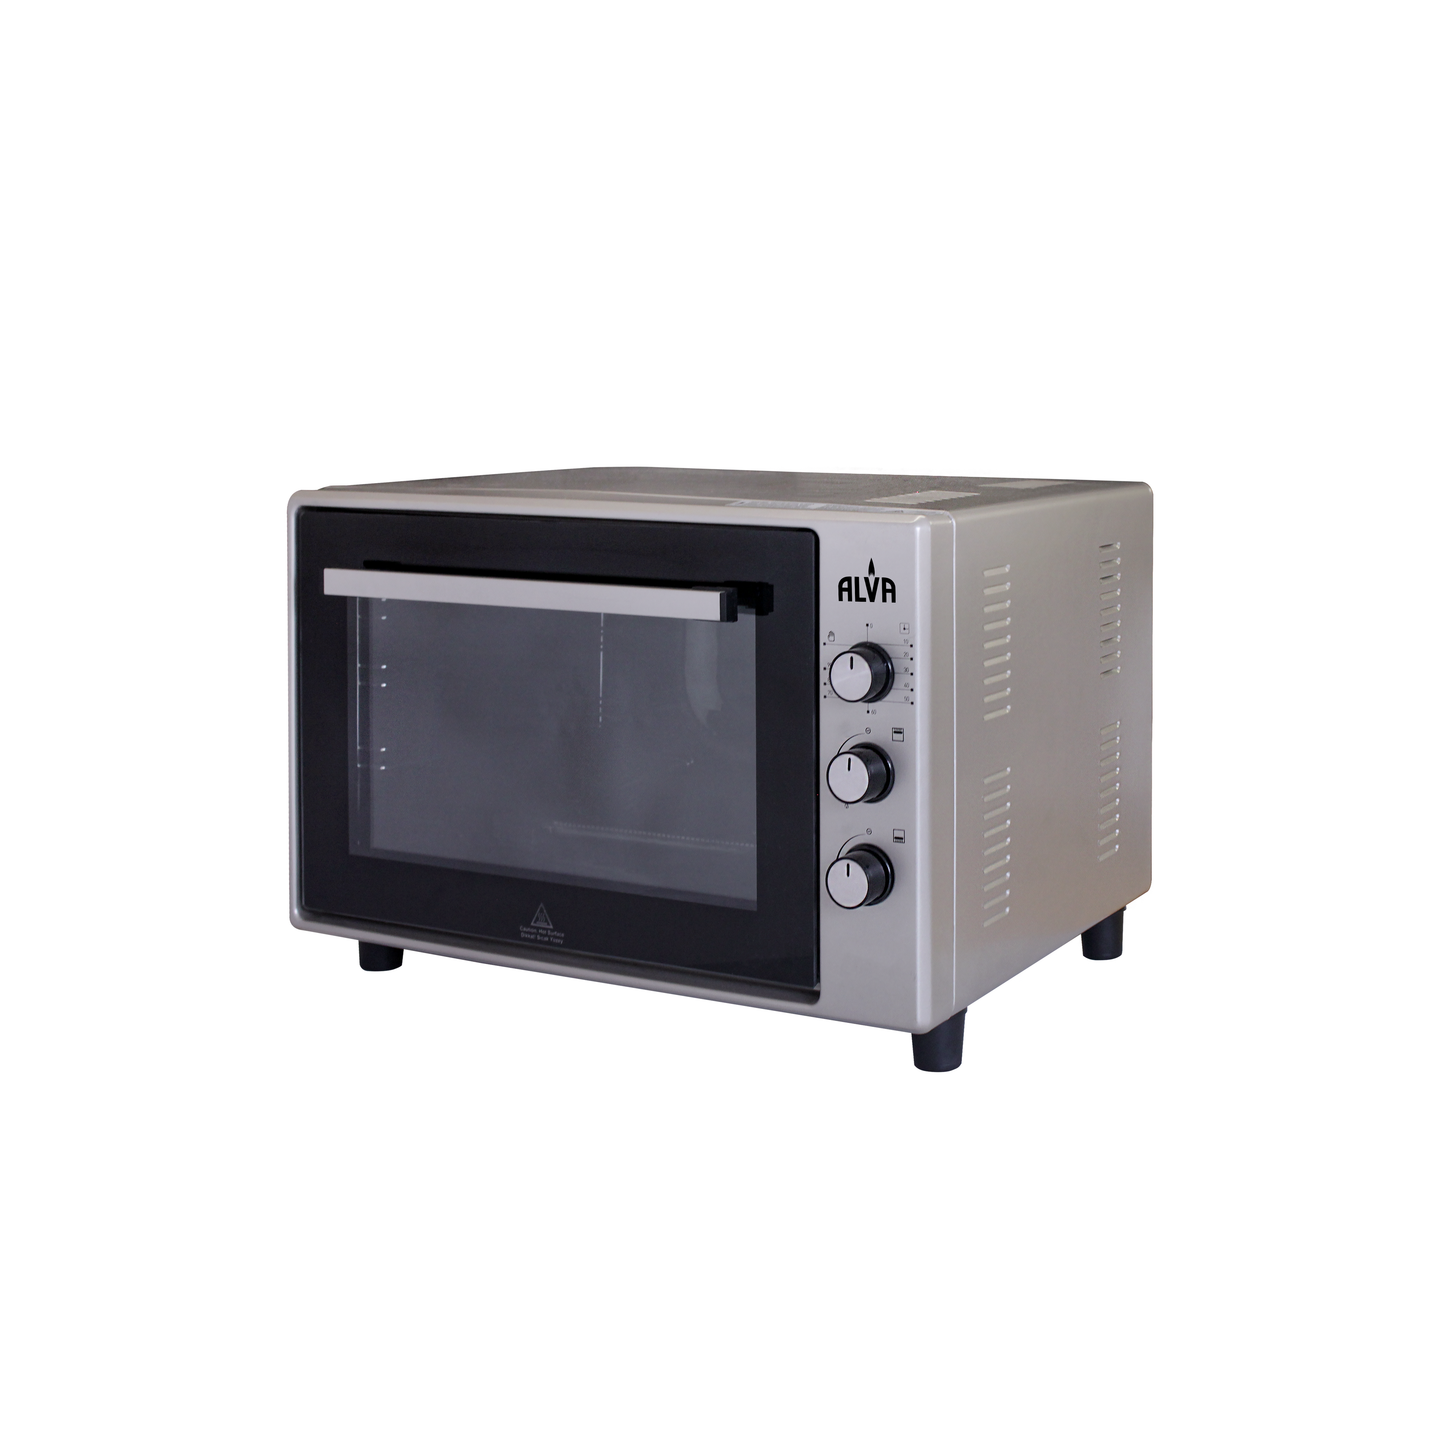 COUNTER-TOP GAS OVEN 60L